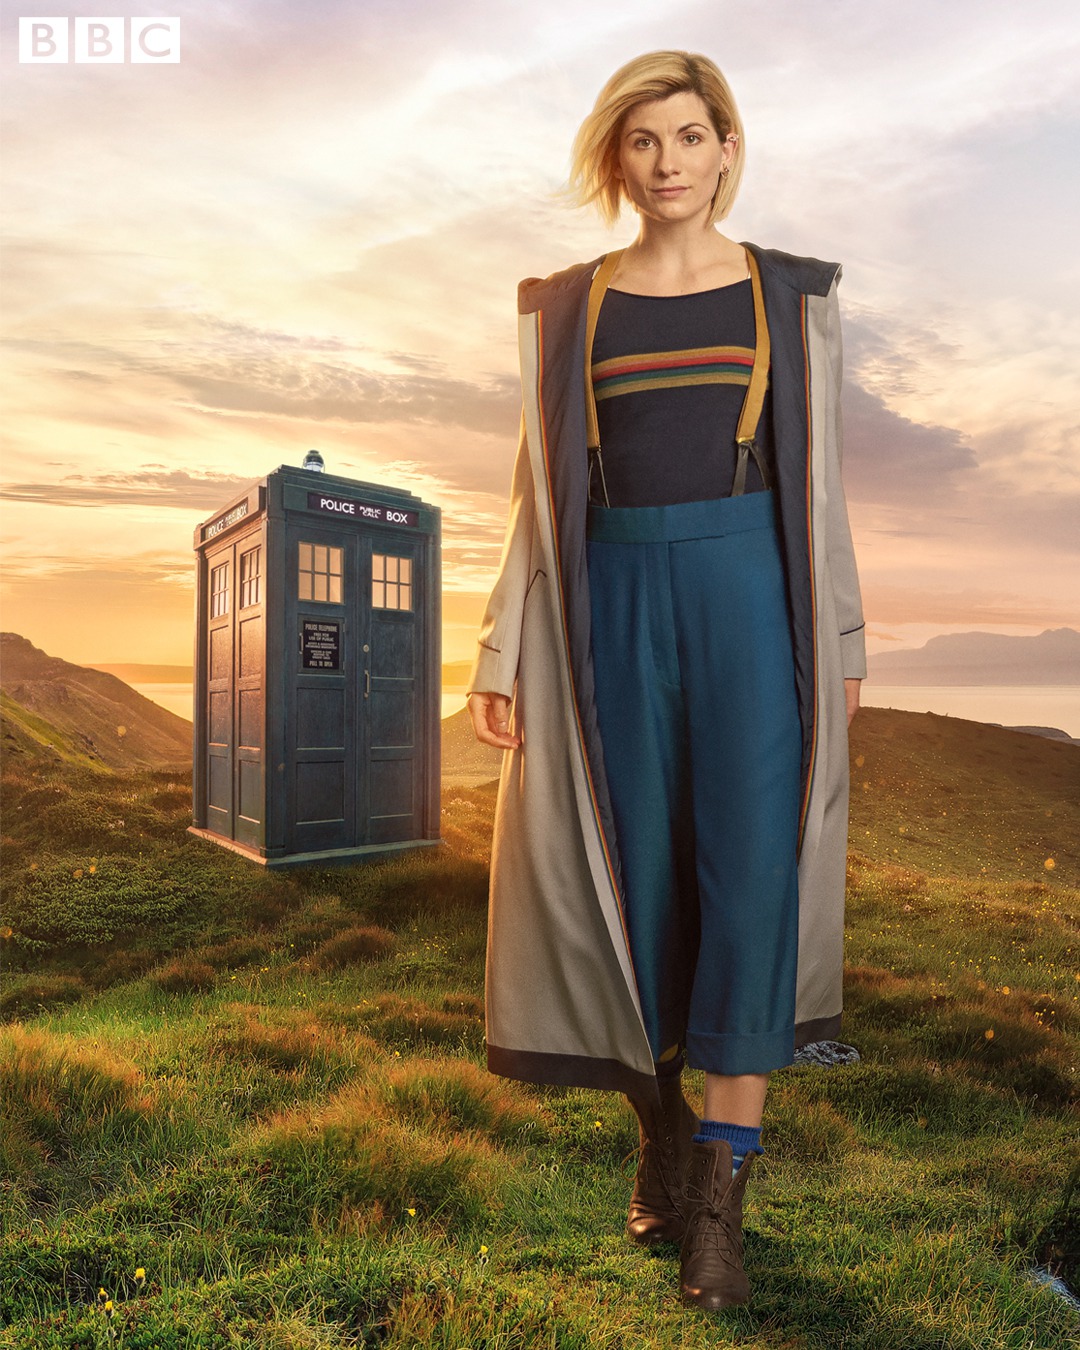 Extra Large TV Poster Image for Doctor Who (#17 of 32)